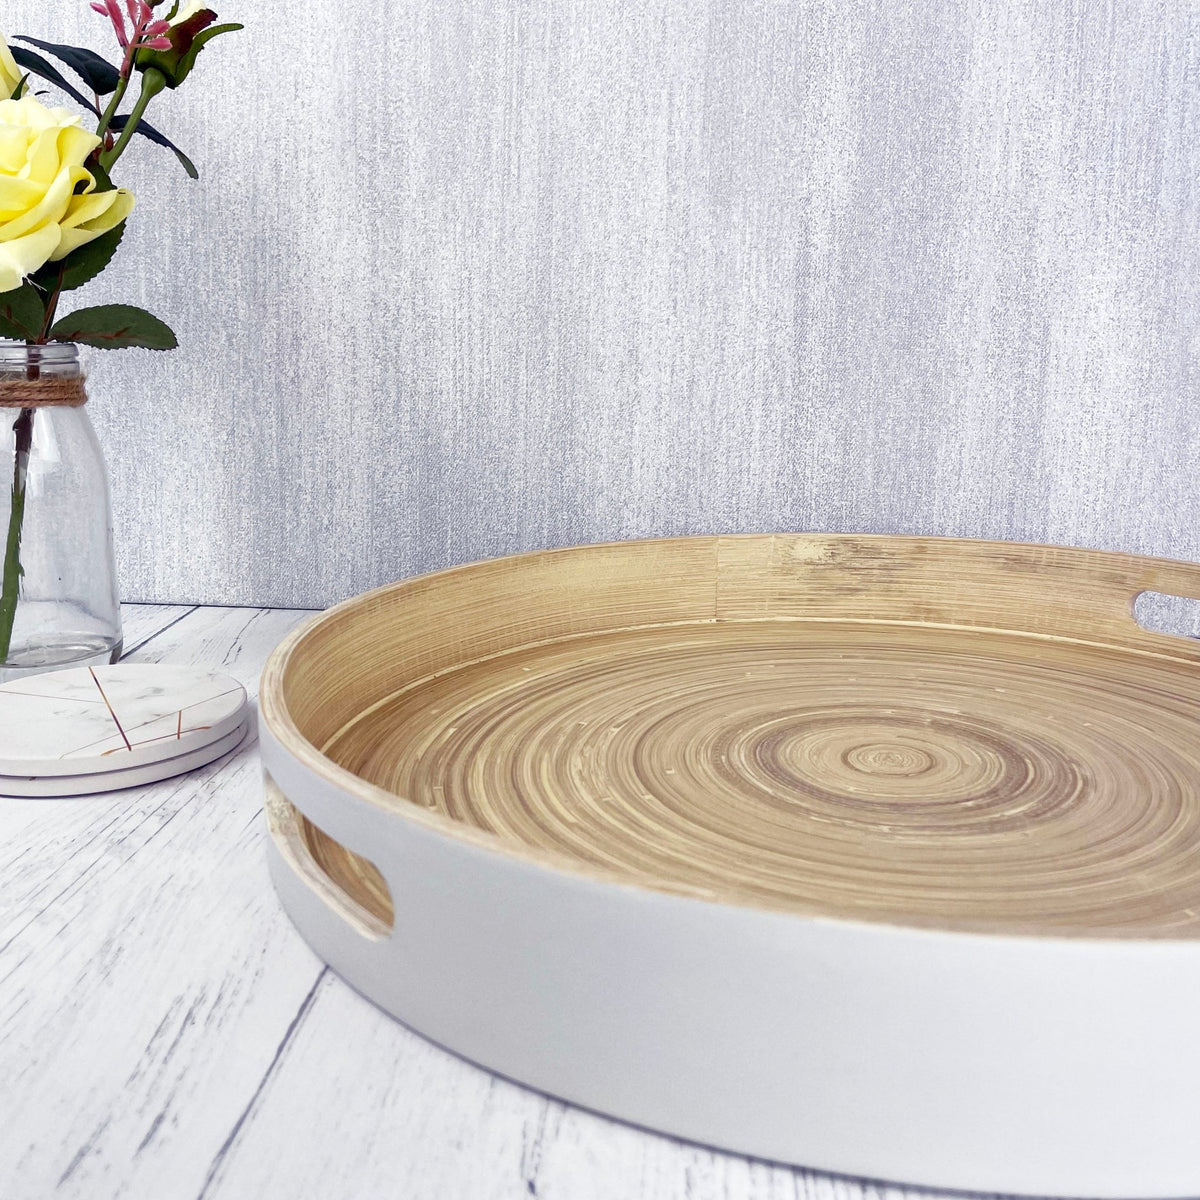 Pandam Bamboo Serving Tray on white table